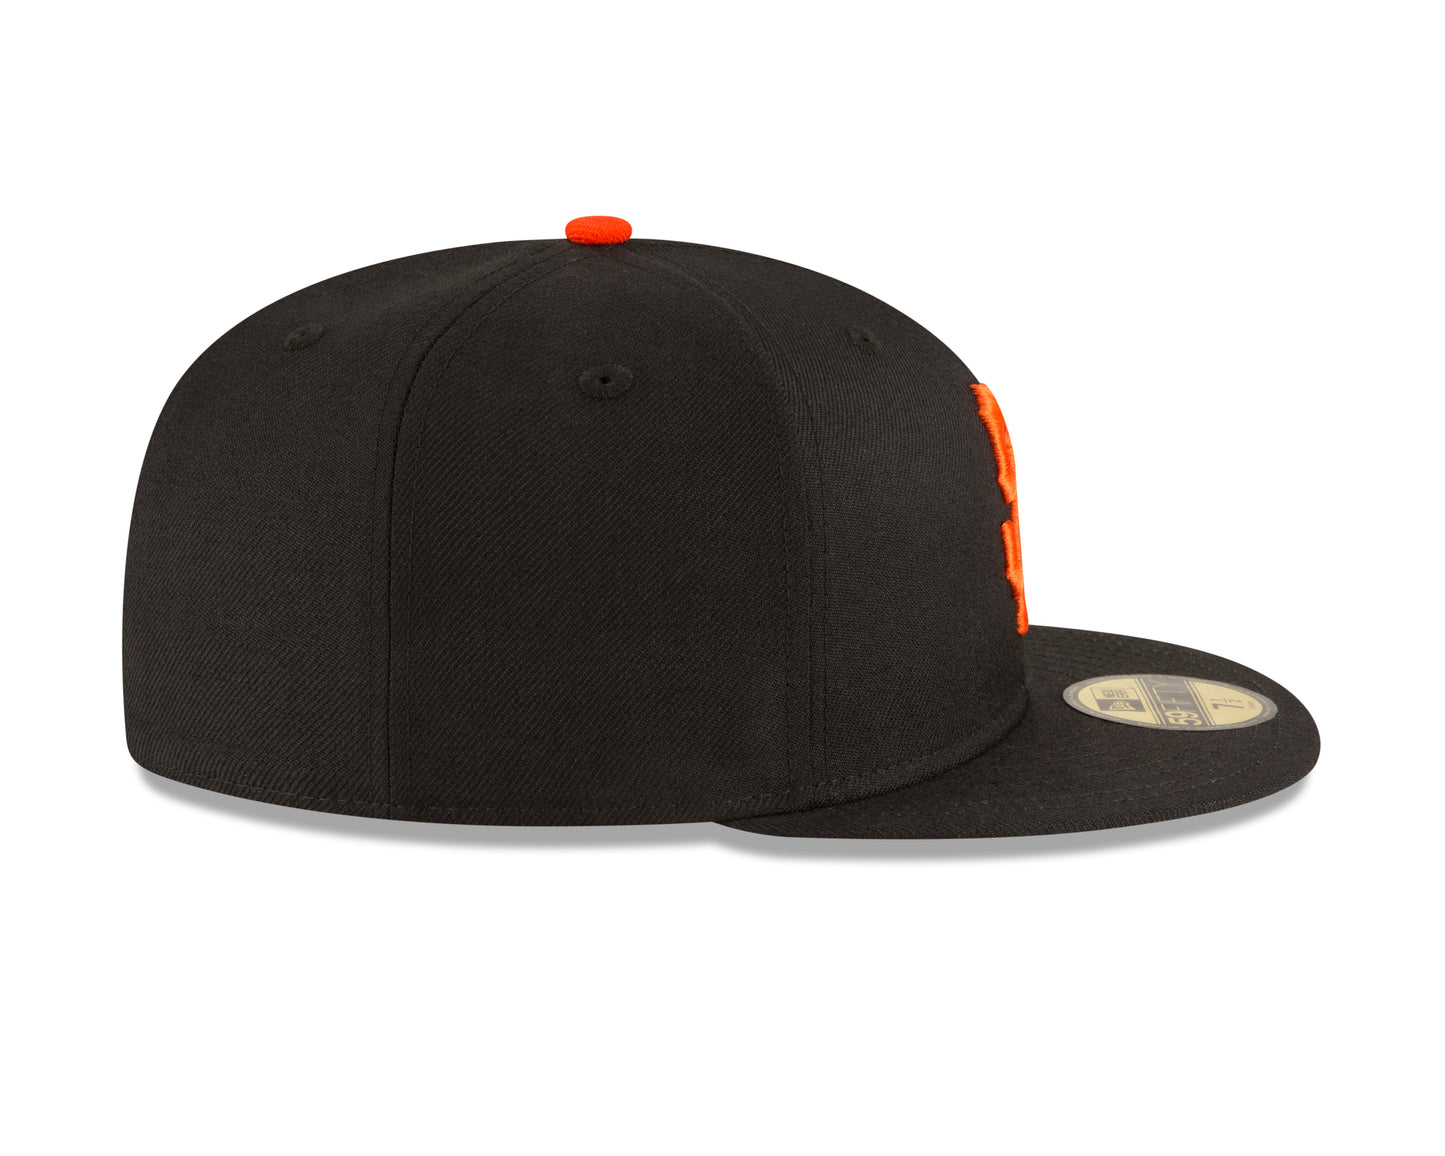 San Francisco Giants New Era 2002 World Series Patch 59FIFTY Fitted Hat - Black